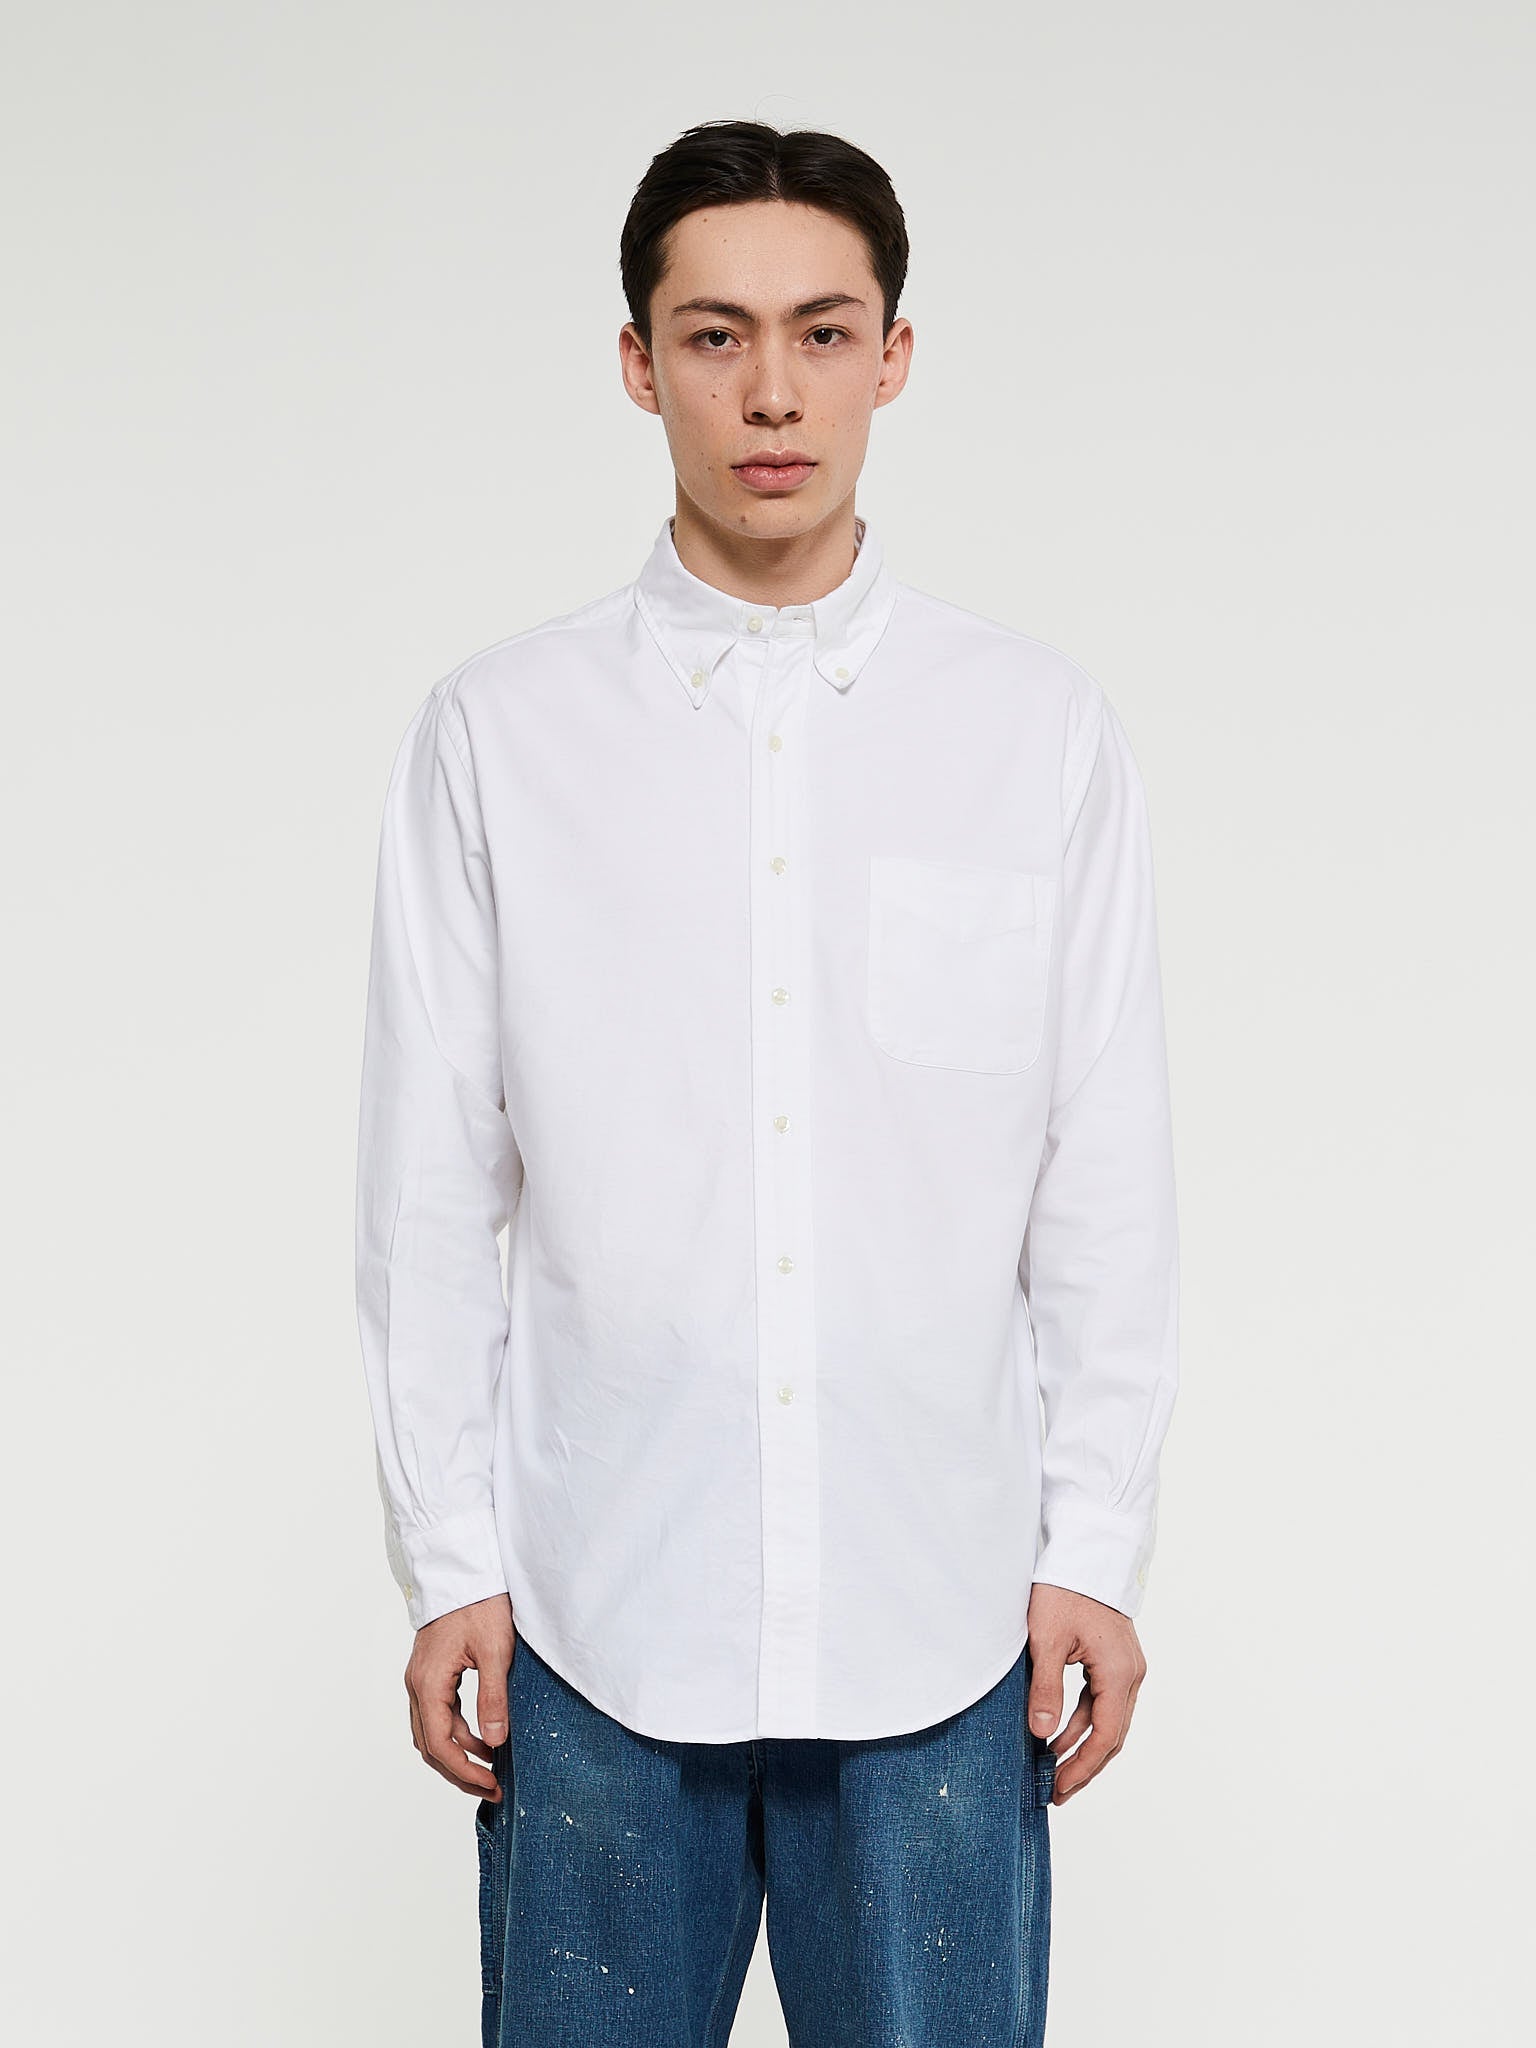 orSlow - Oxford Standard Button Down Shirt in White